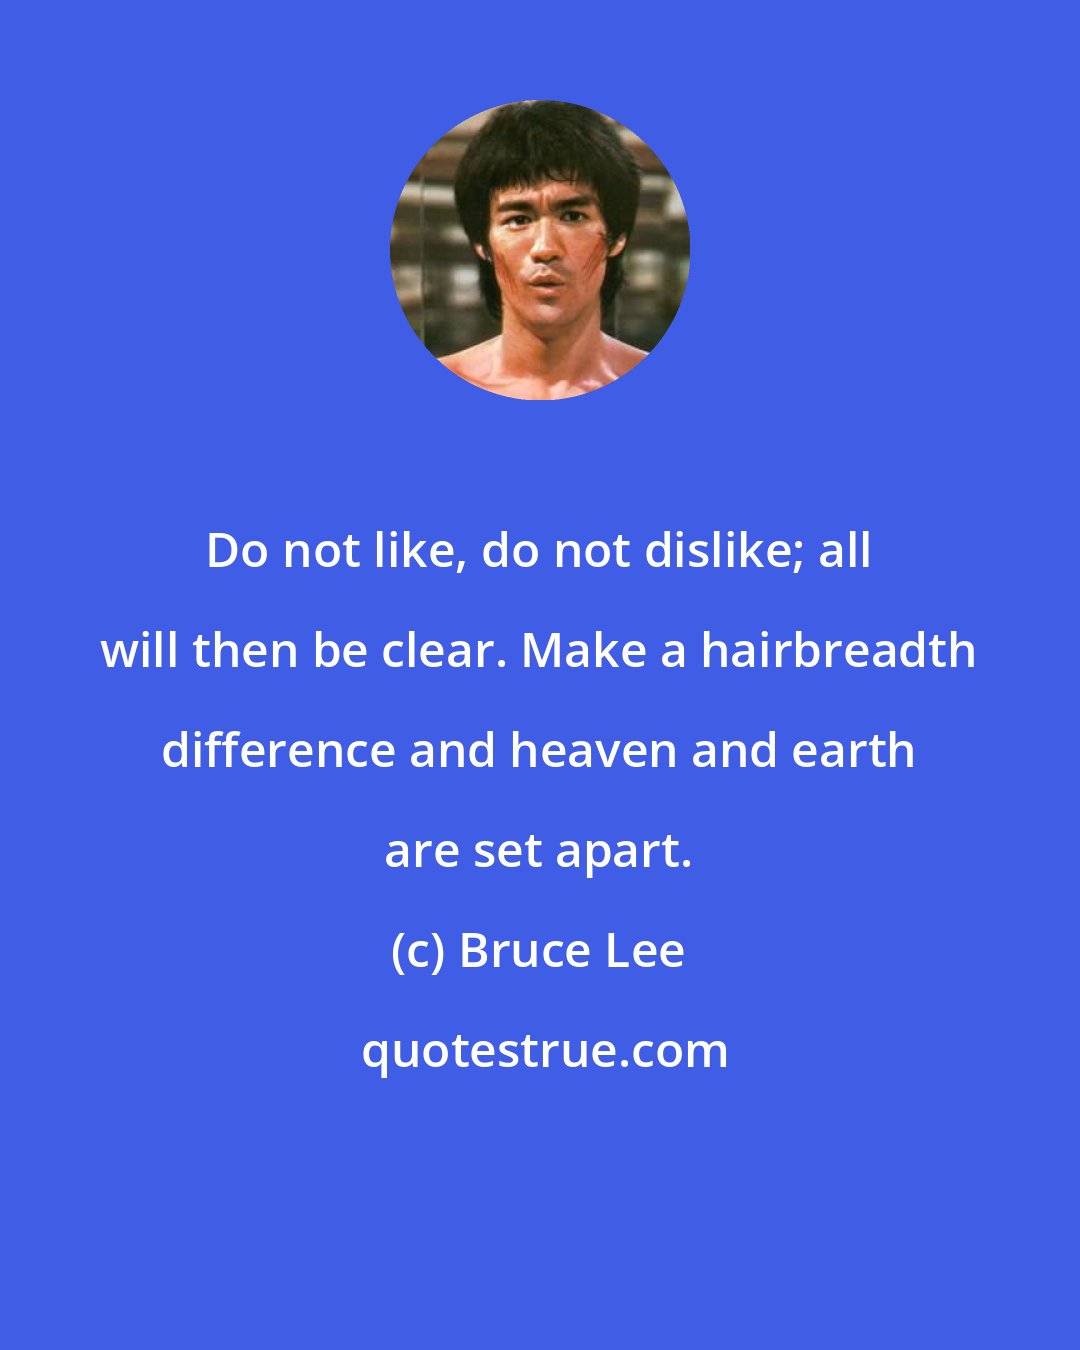 Bruce Lee: Do not like, do not dislike; all will then be clear. Make a hairbreadth difference and heaven and earth are set apart.